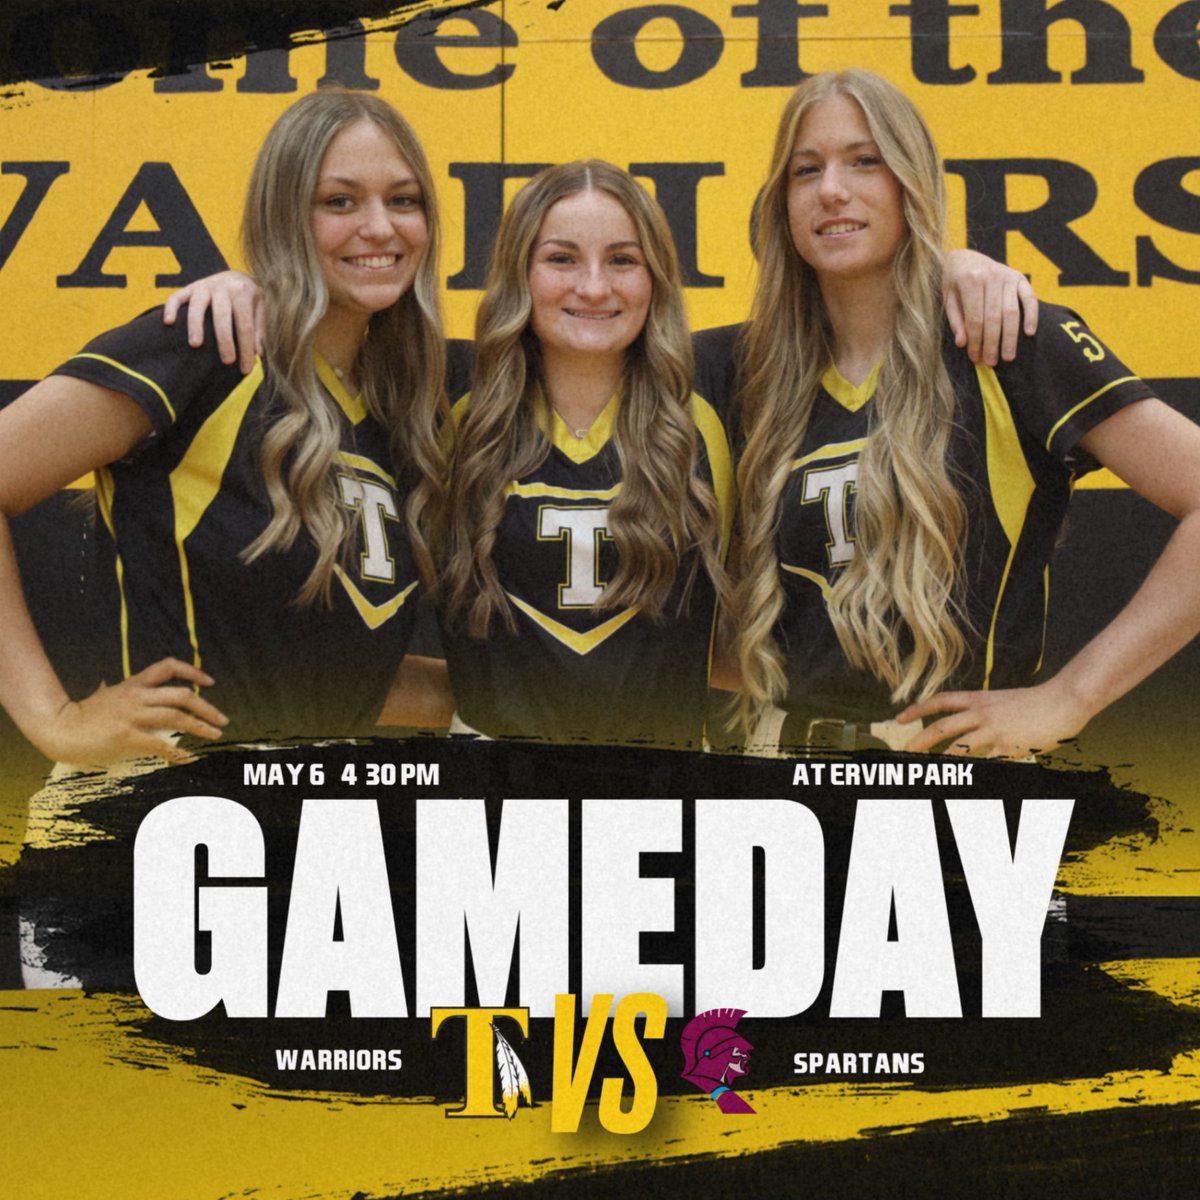 Good luck to Warriors Softball who play the Spartans this afternoon at Ervin Park. #FearTheSpear